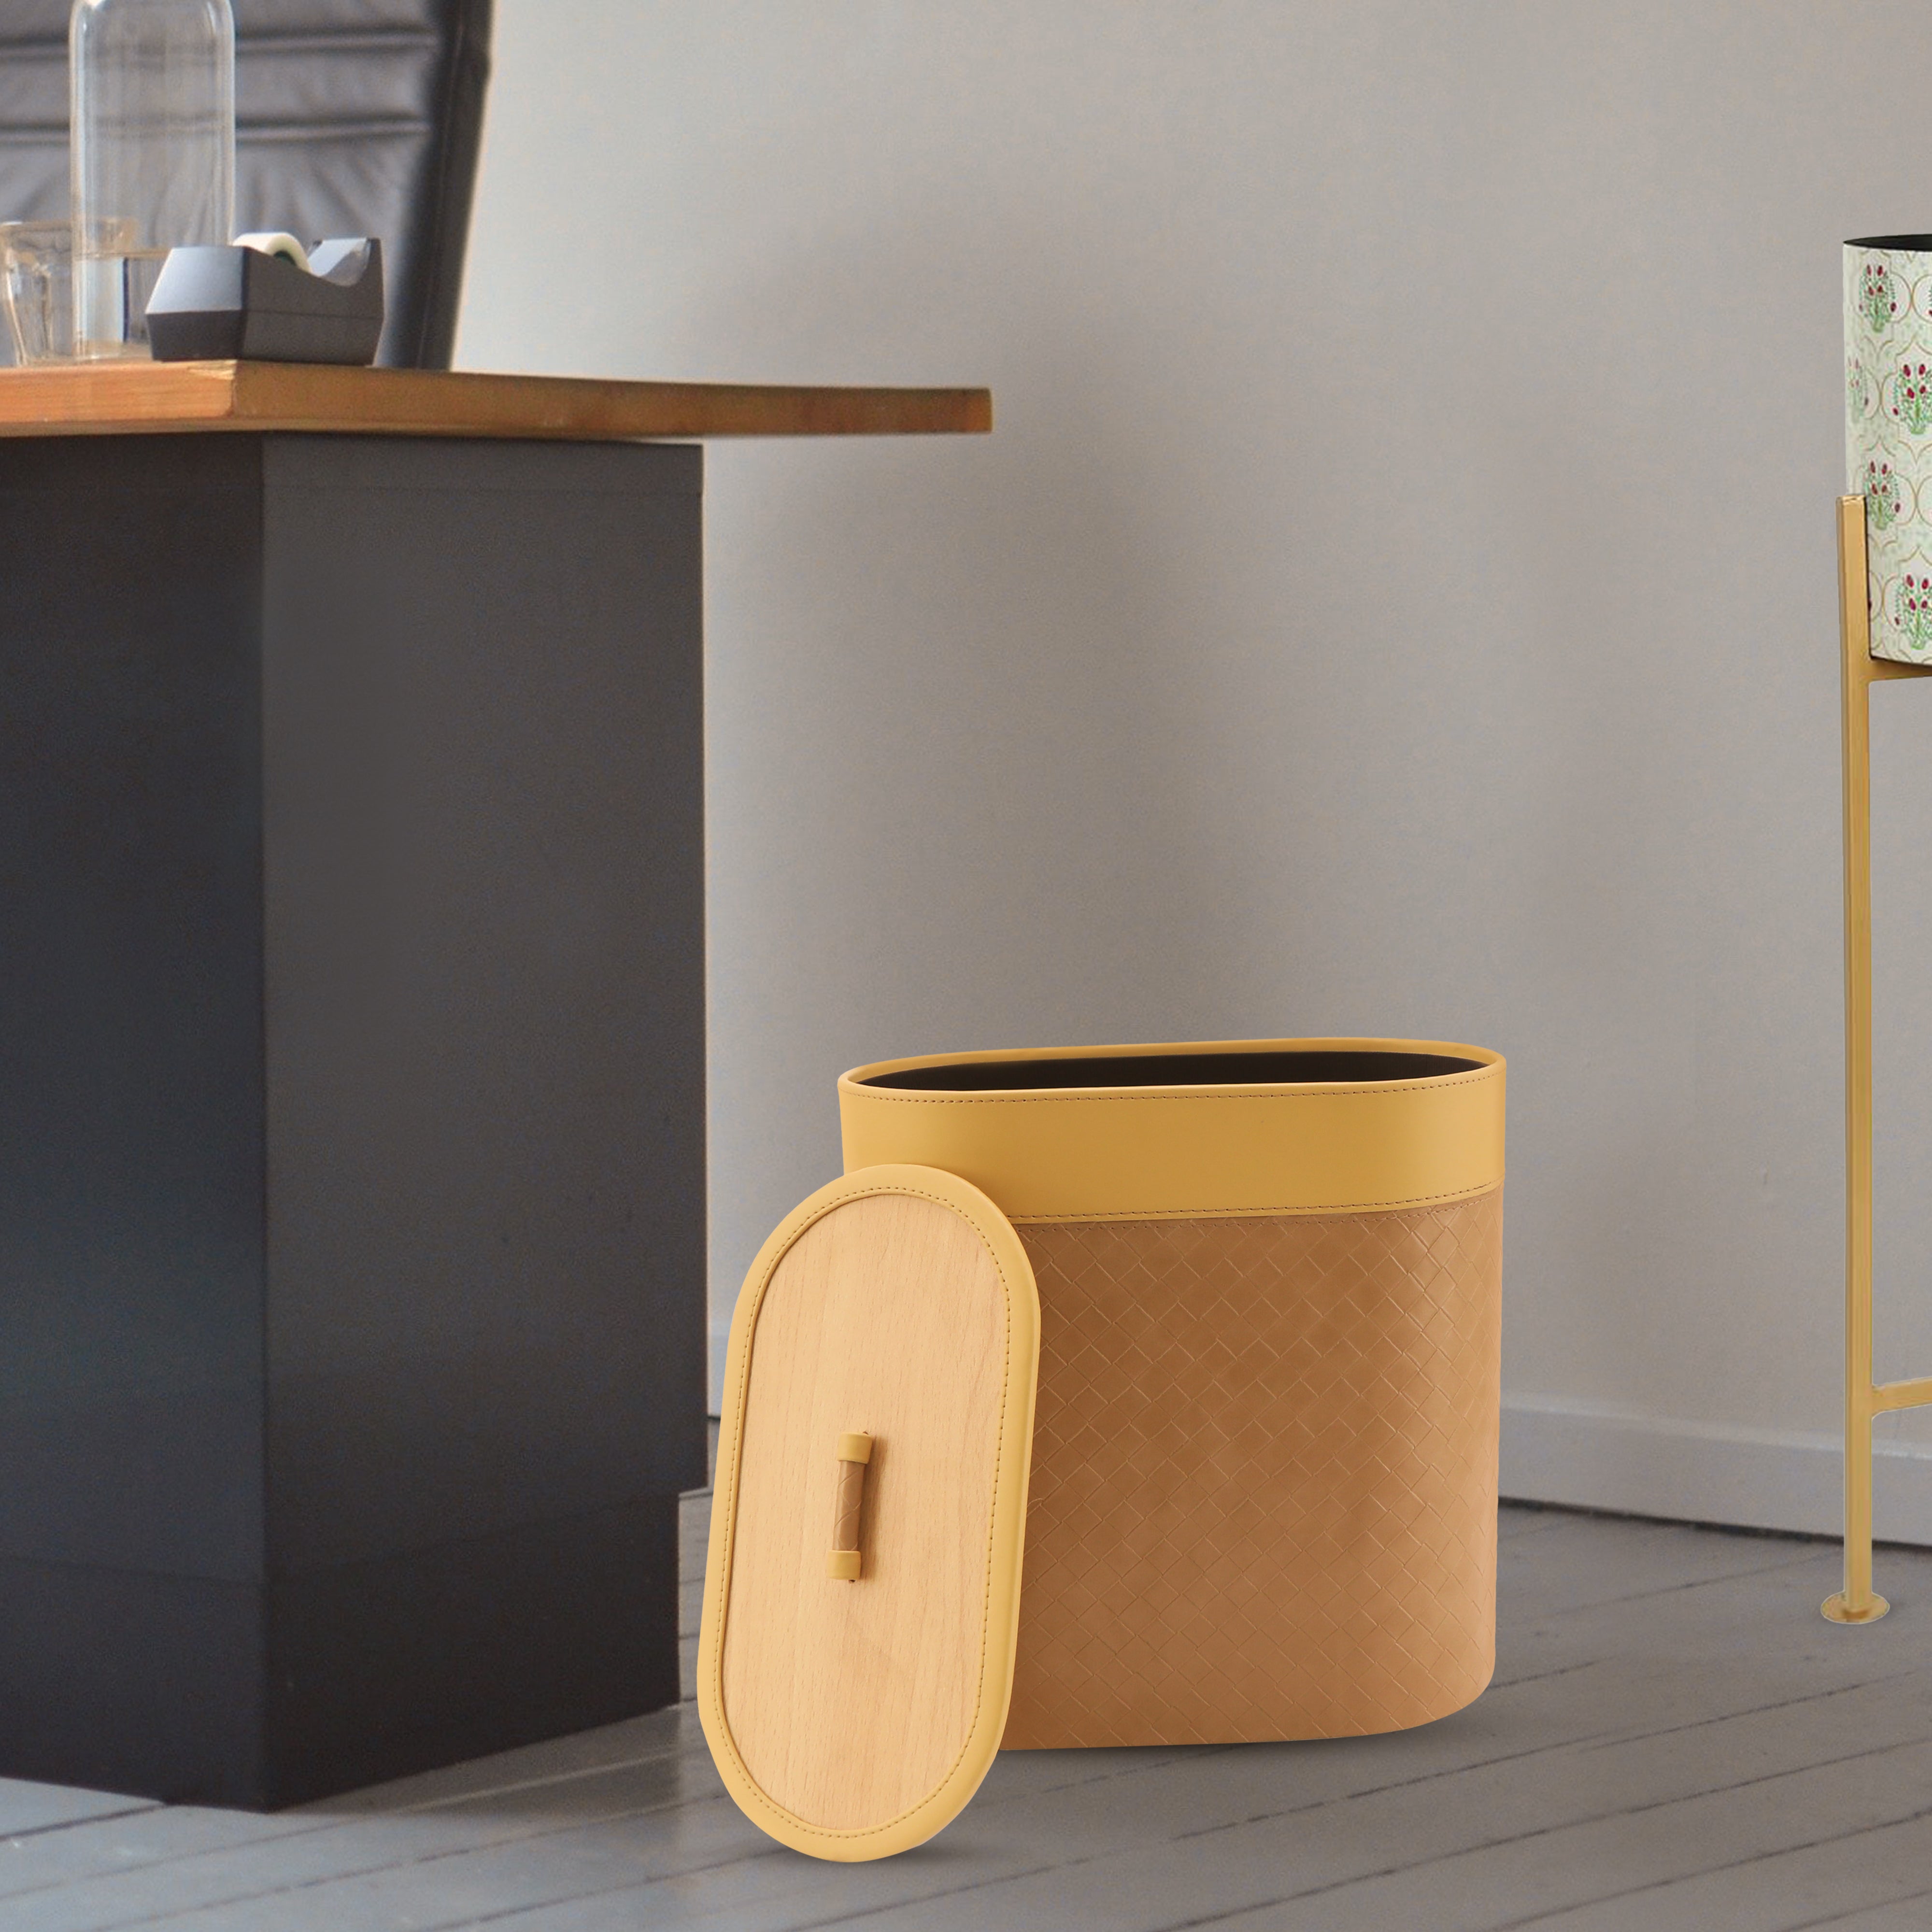 Dustbin With Lid - Cream Leatherette - The Home Co.